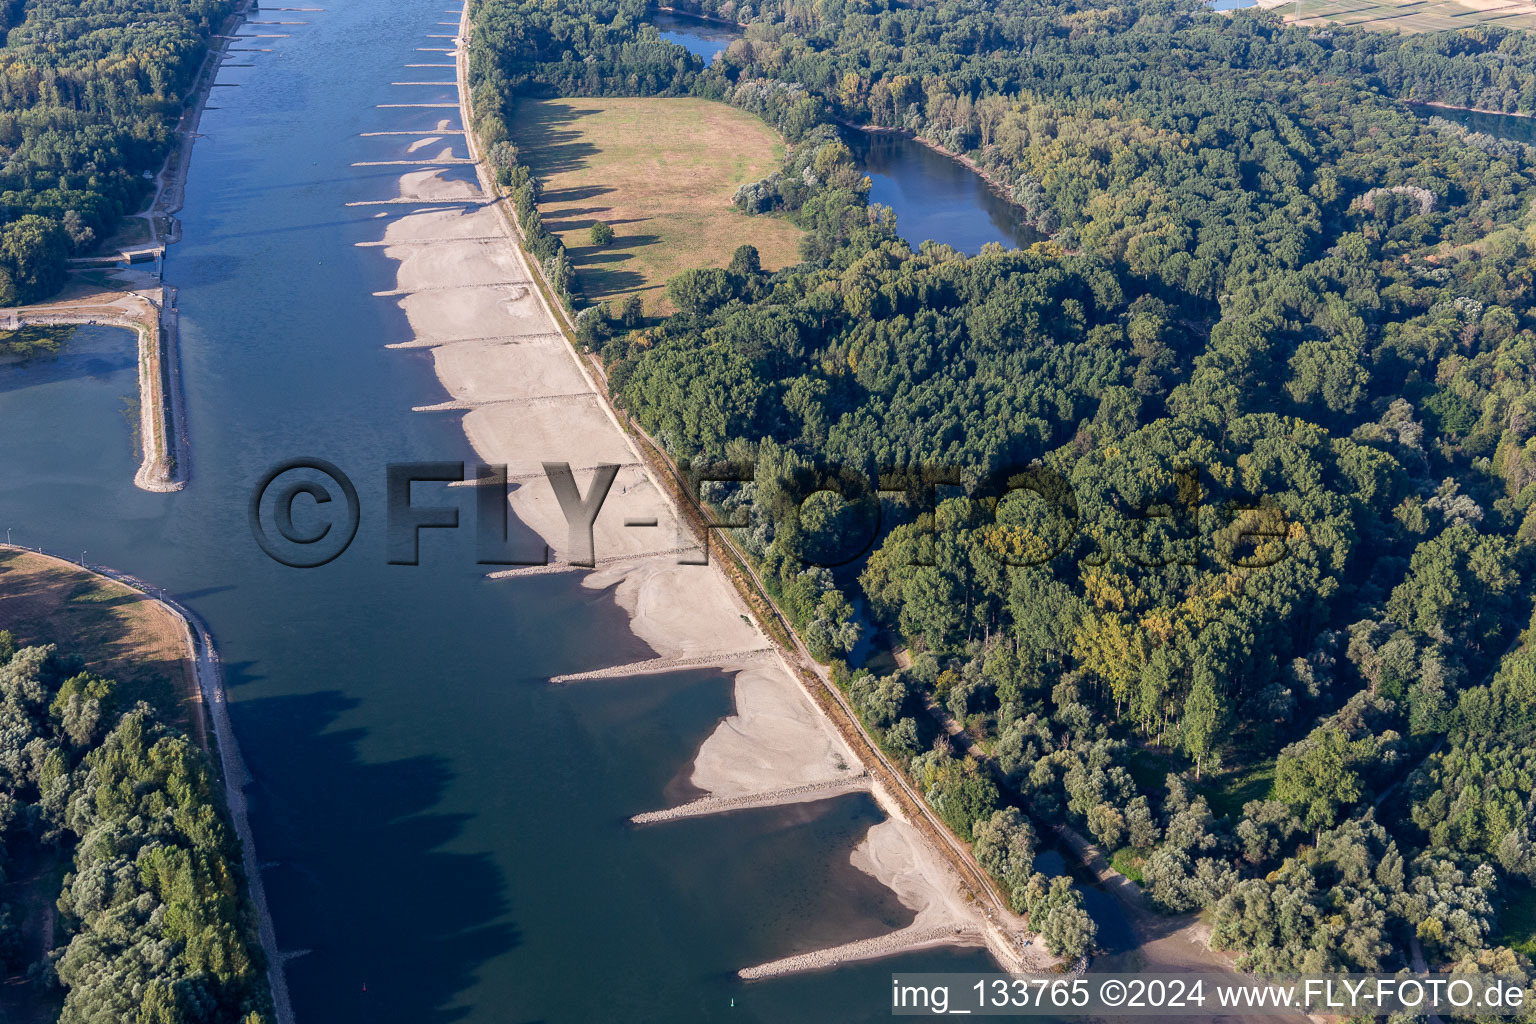 Aerial view of Dry groynes and sand banks in the Rhine due to low water in the district Maximiliansau in Wörth am Rhein in the state Rhineland-Palatinate, Germany